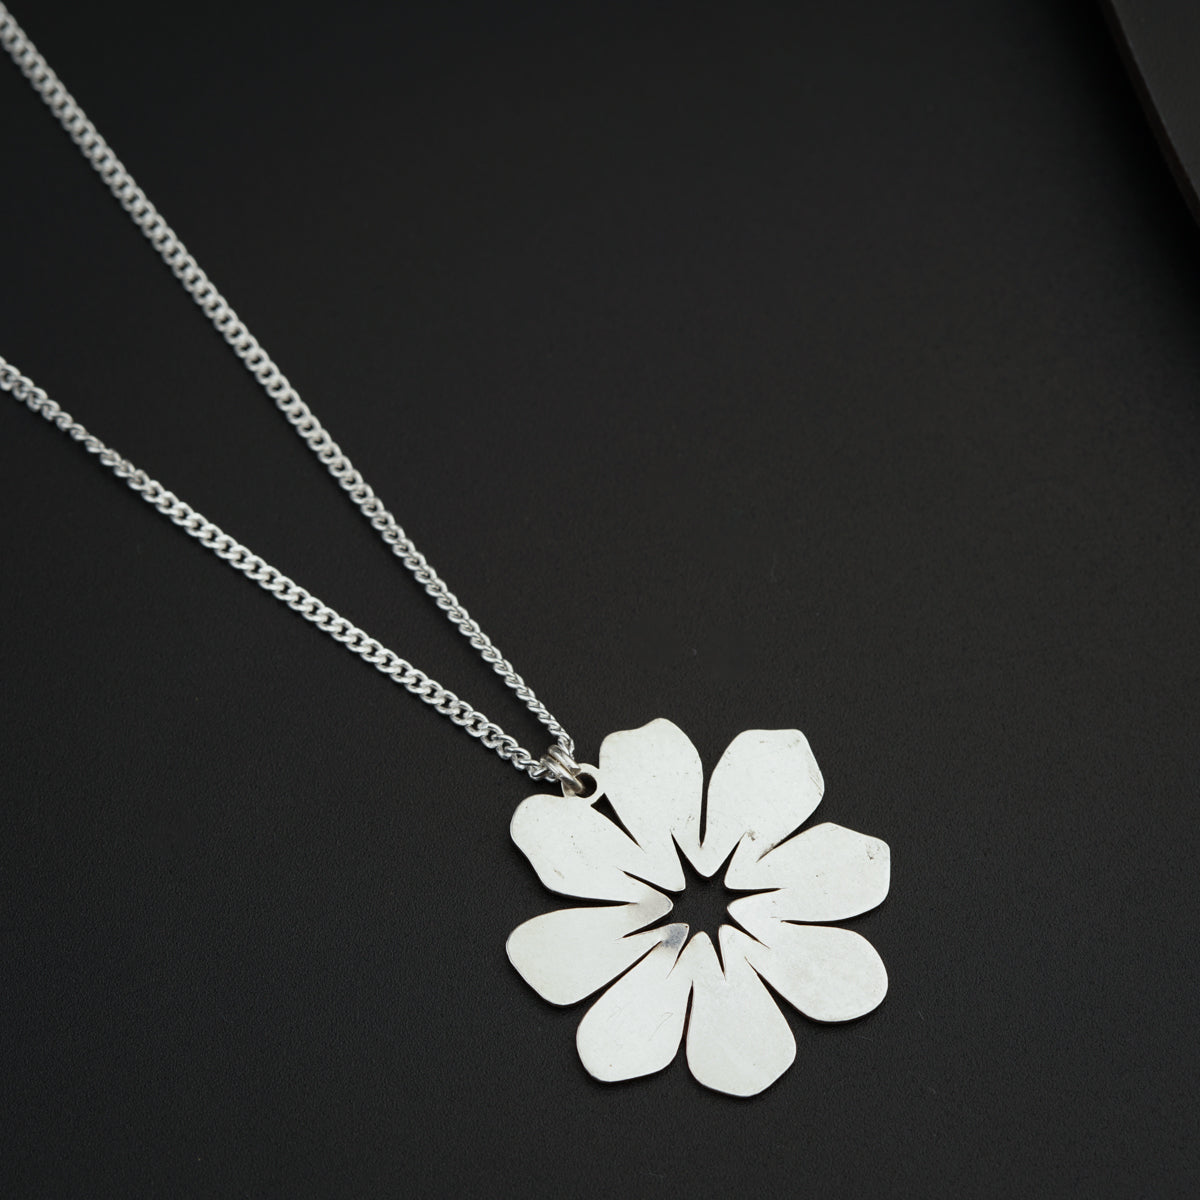 a necklace with a flower cut out of it